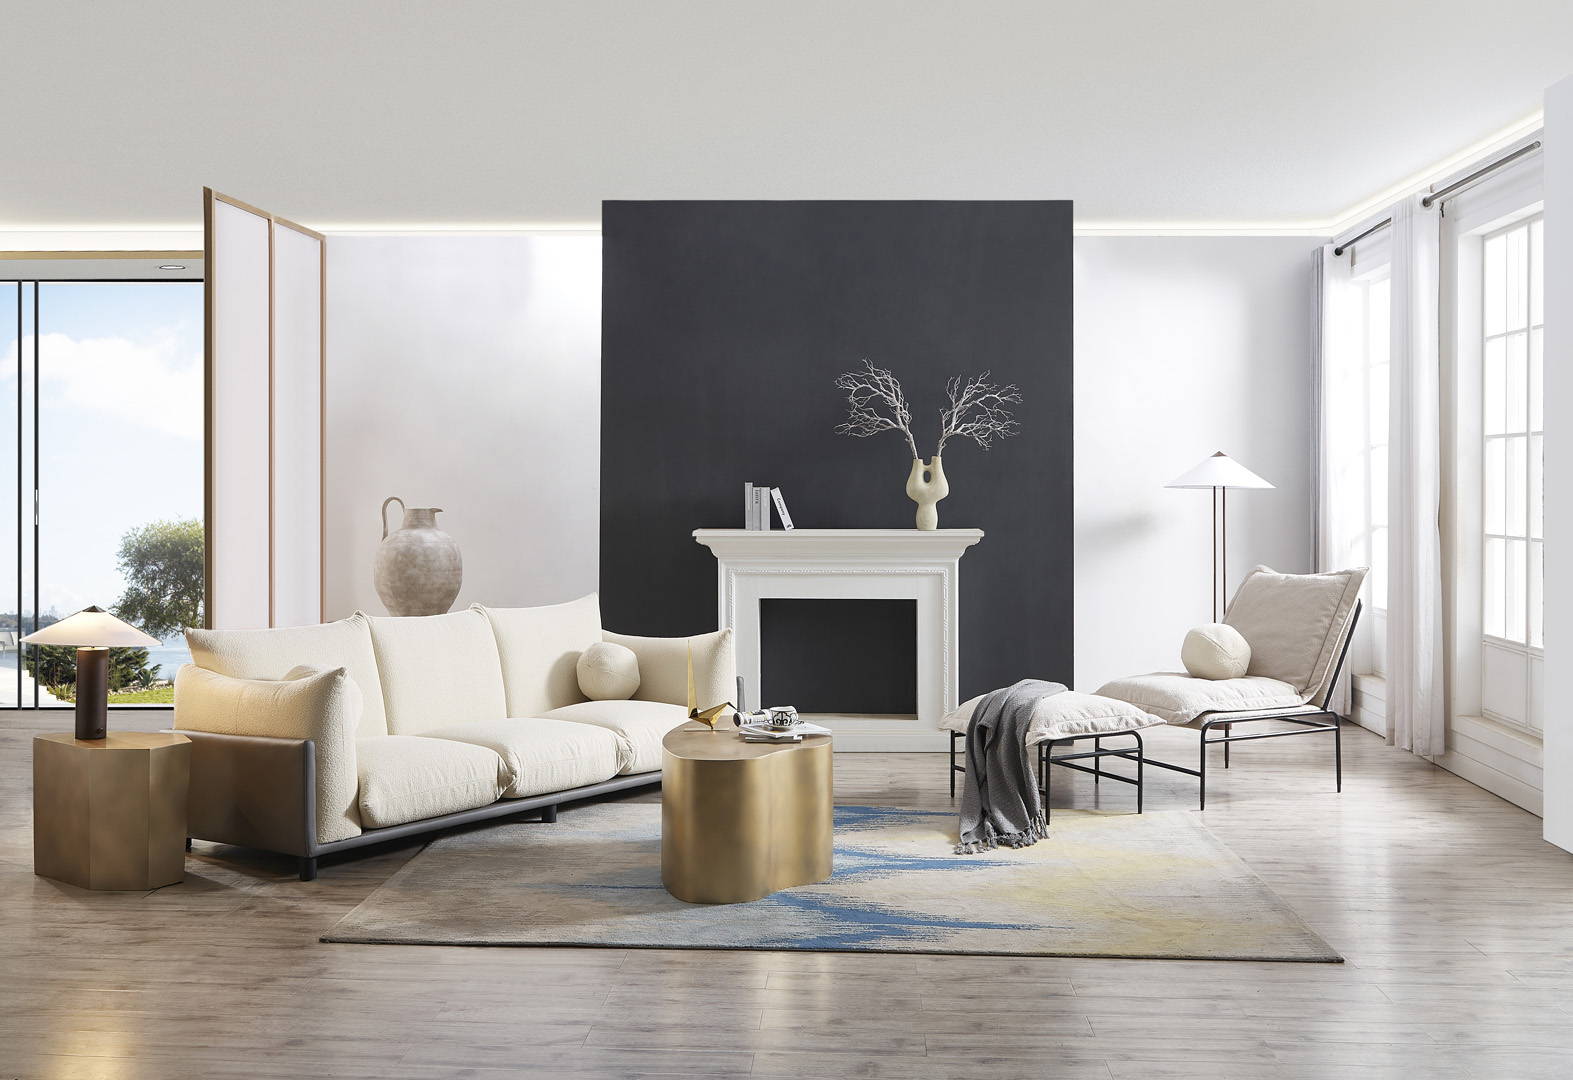 a living room set with a sofa, ottoman, side table and lamp